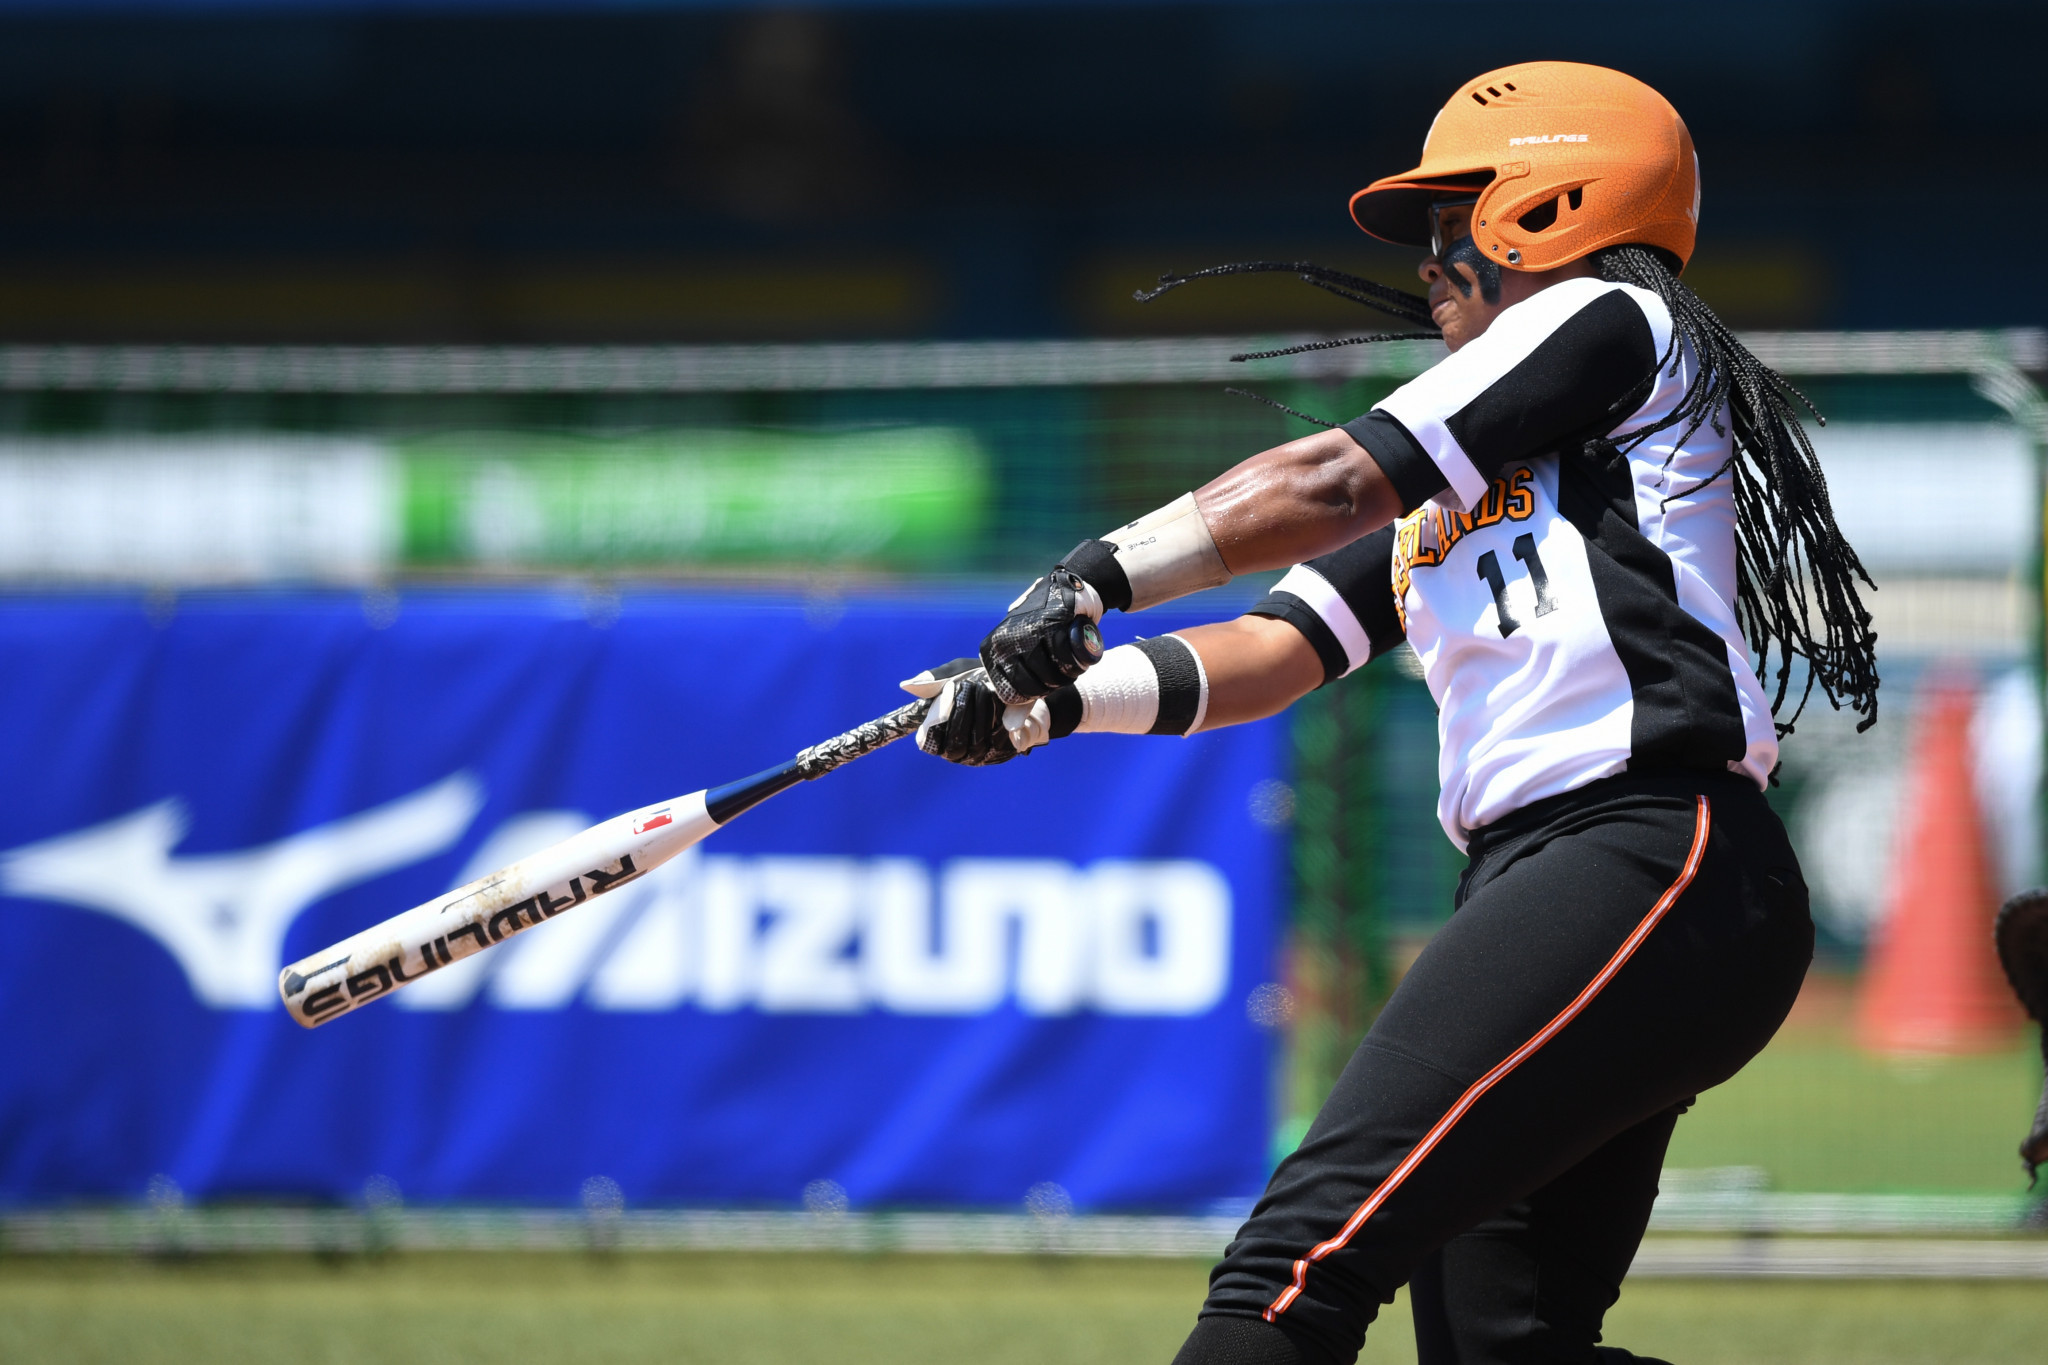 Schedule for 2019 Softball Women’s European Championship released